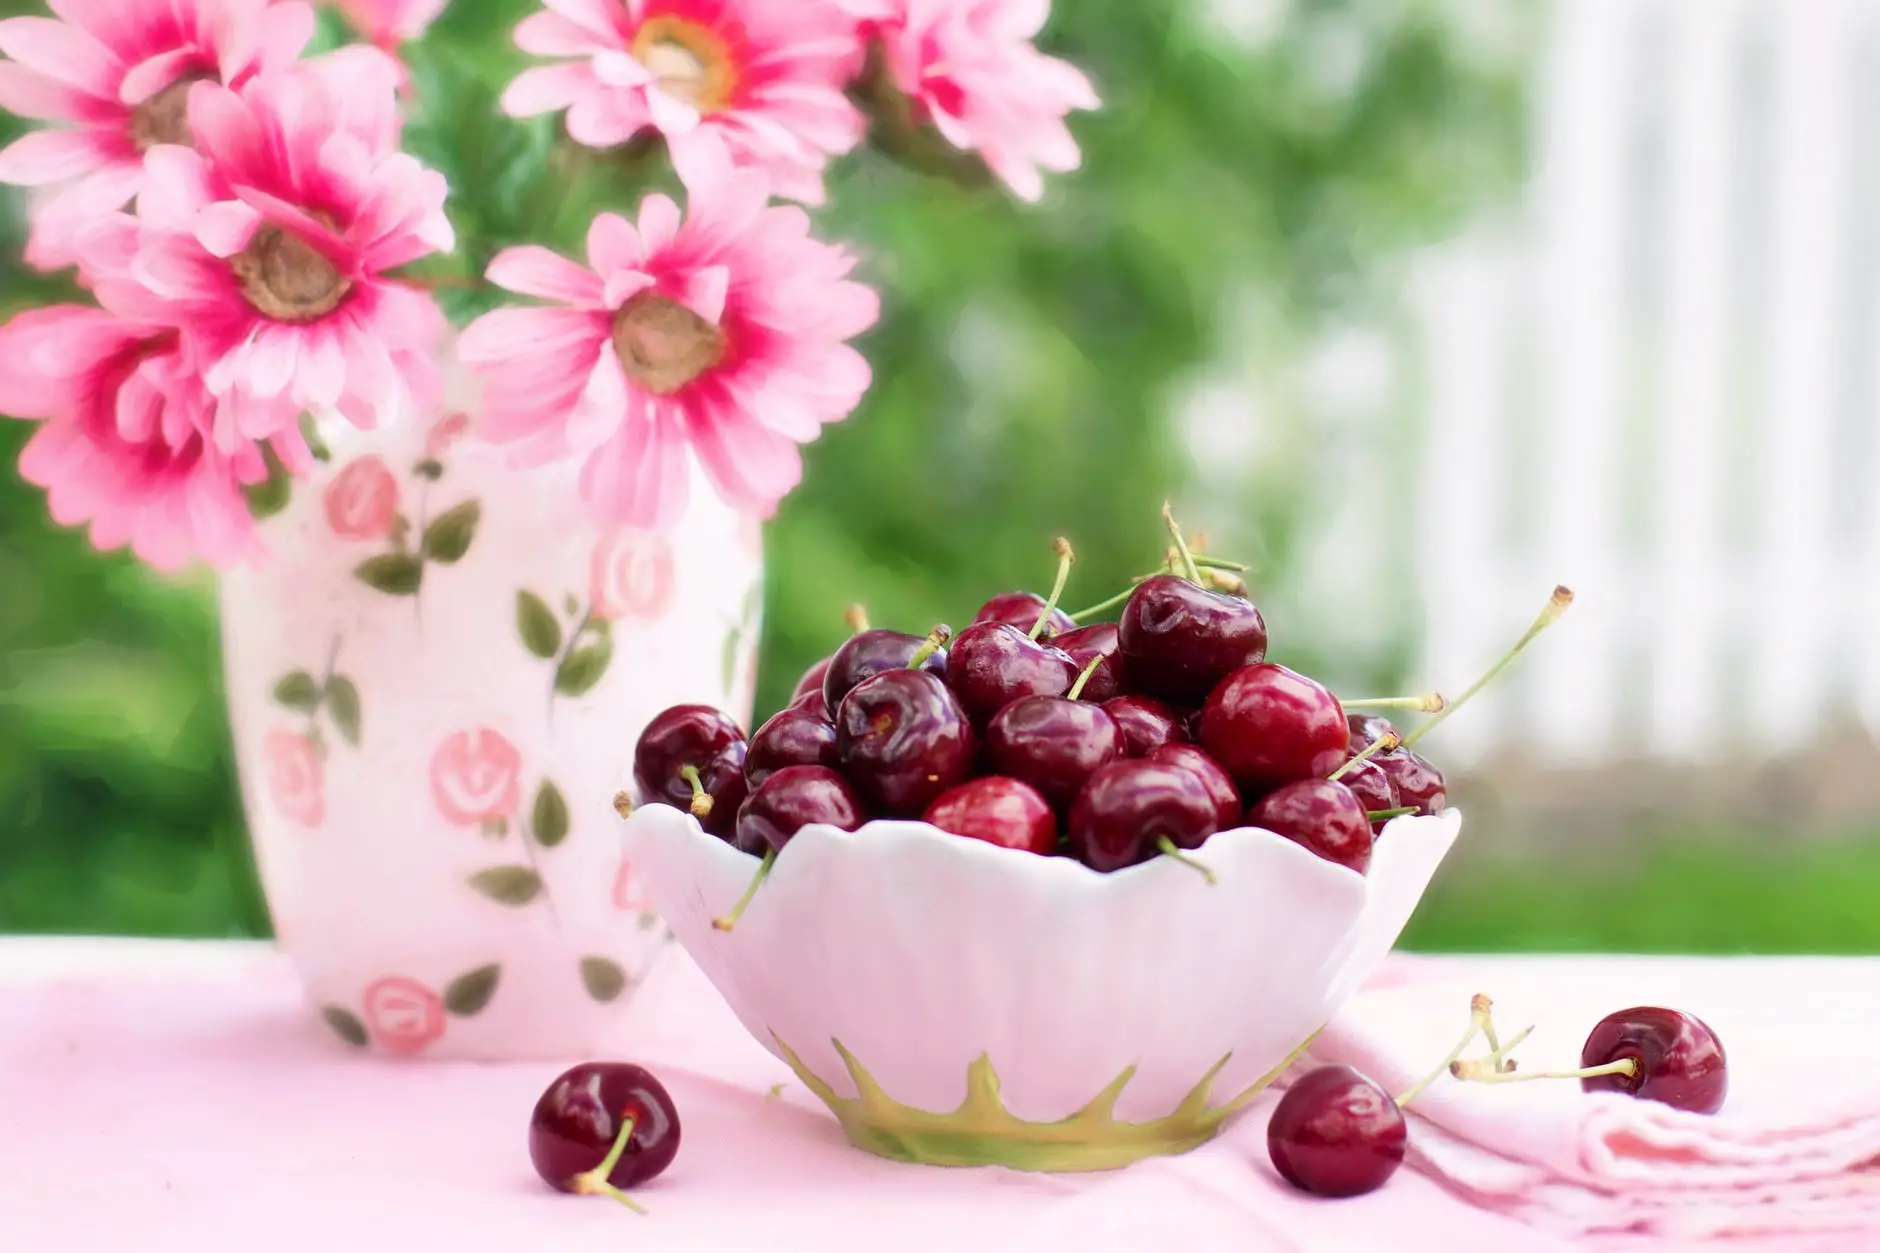 red cherries on bowl